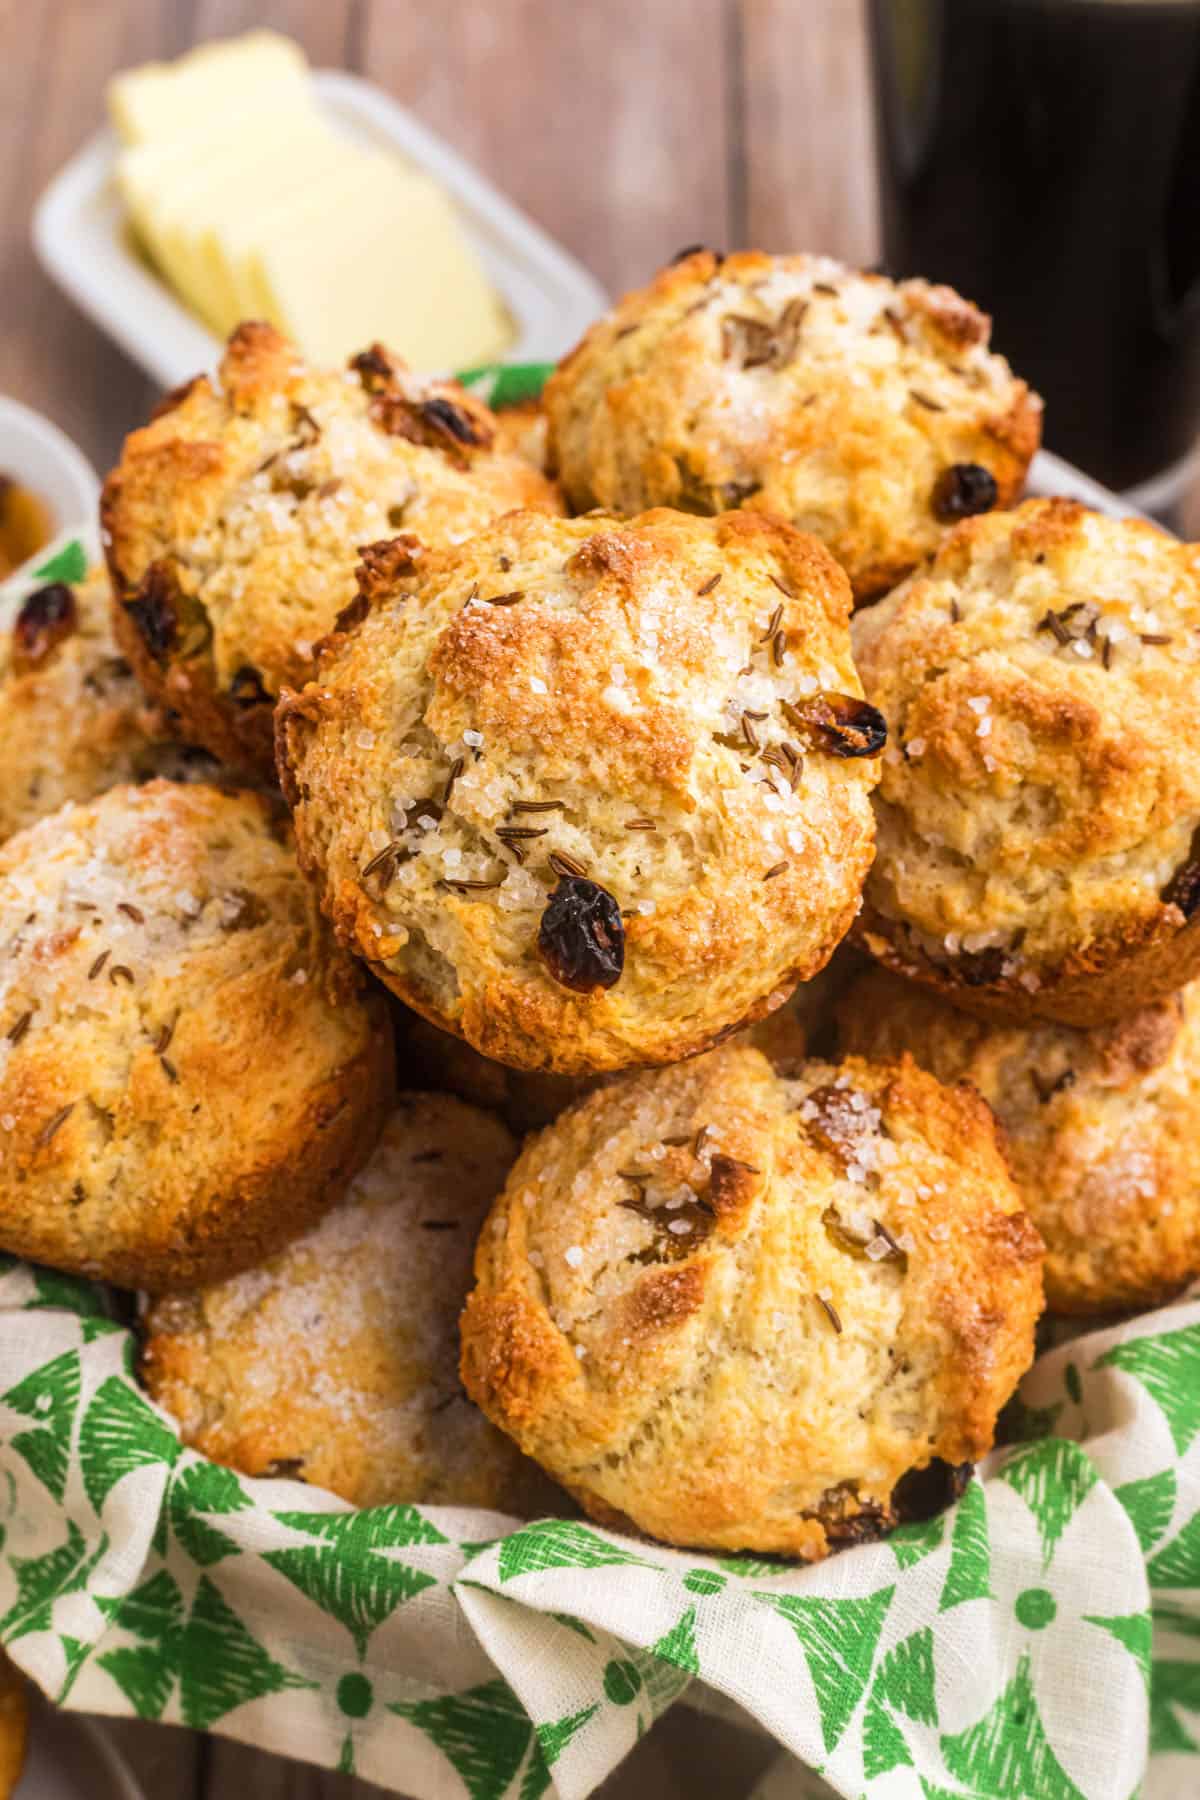 Irish Soda Bread Muffins in a basket with a green and white linen